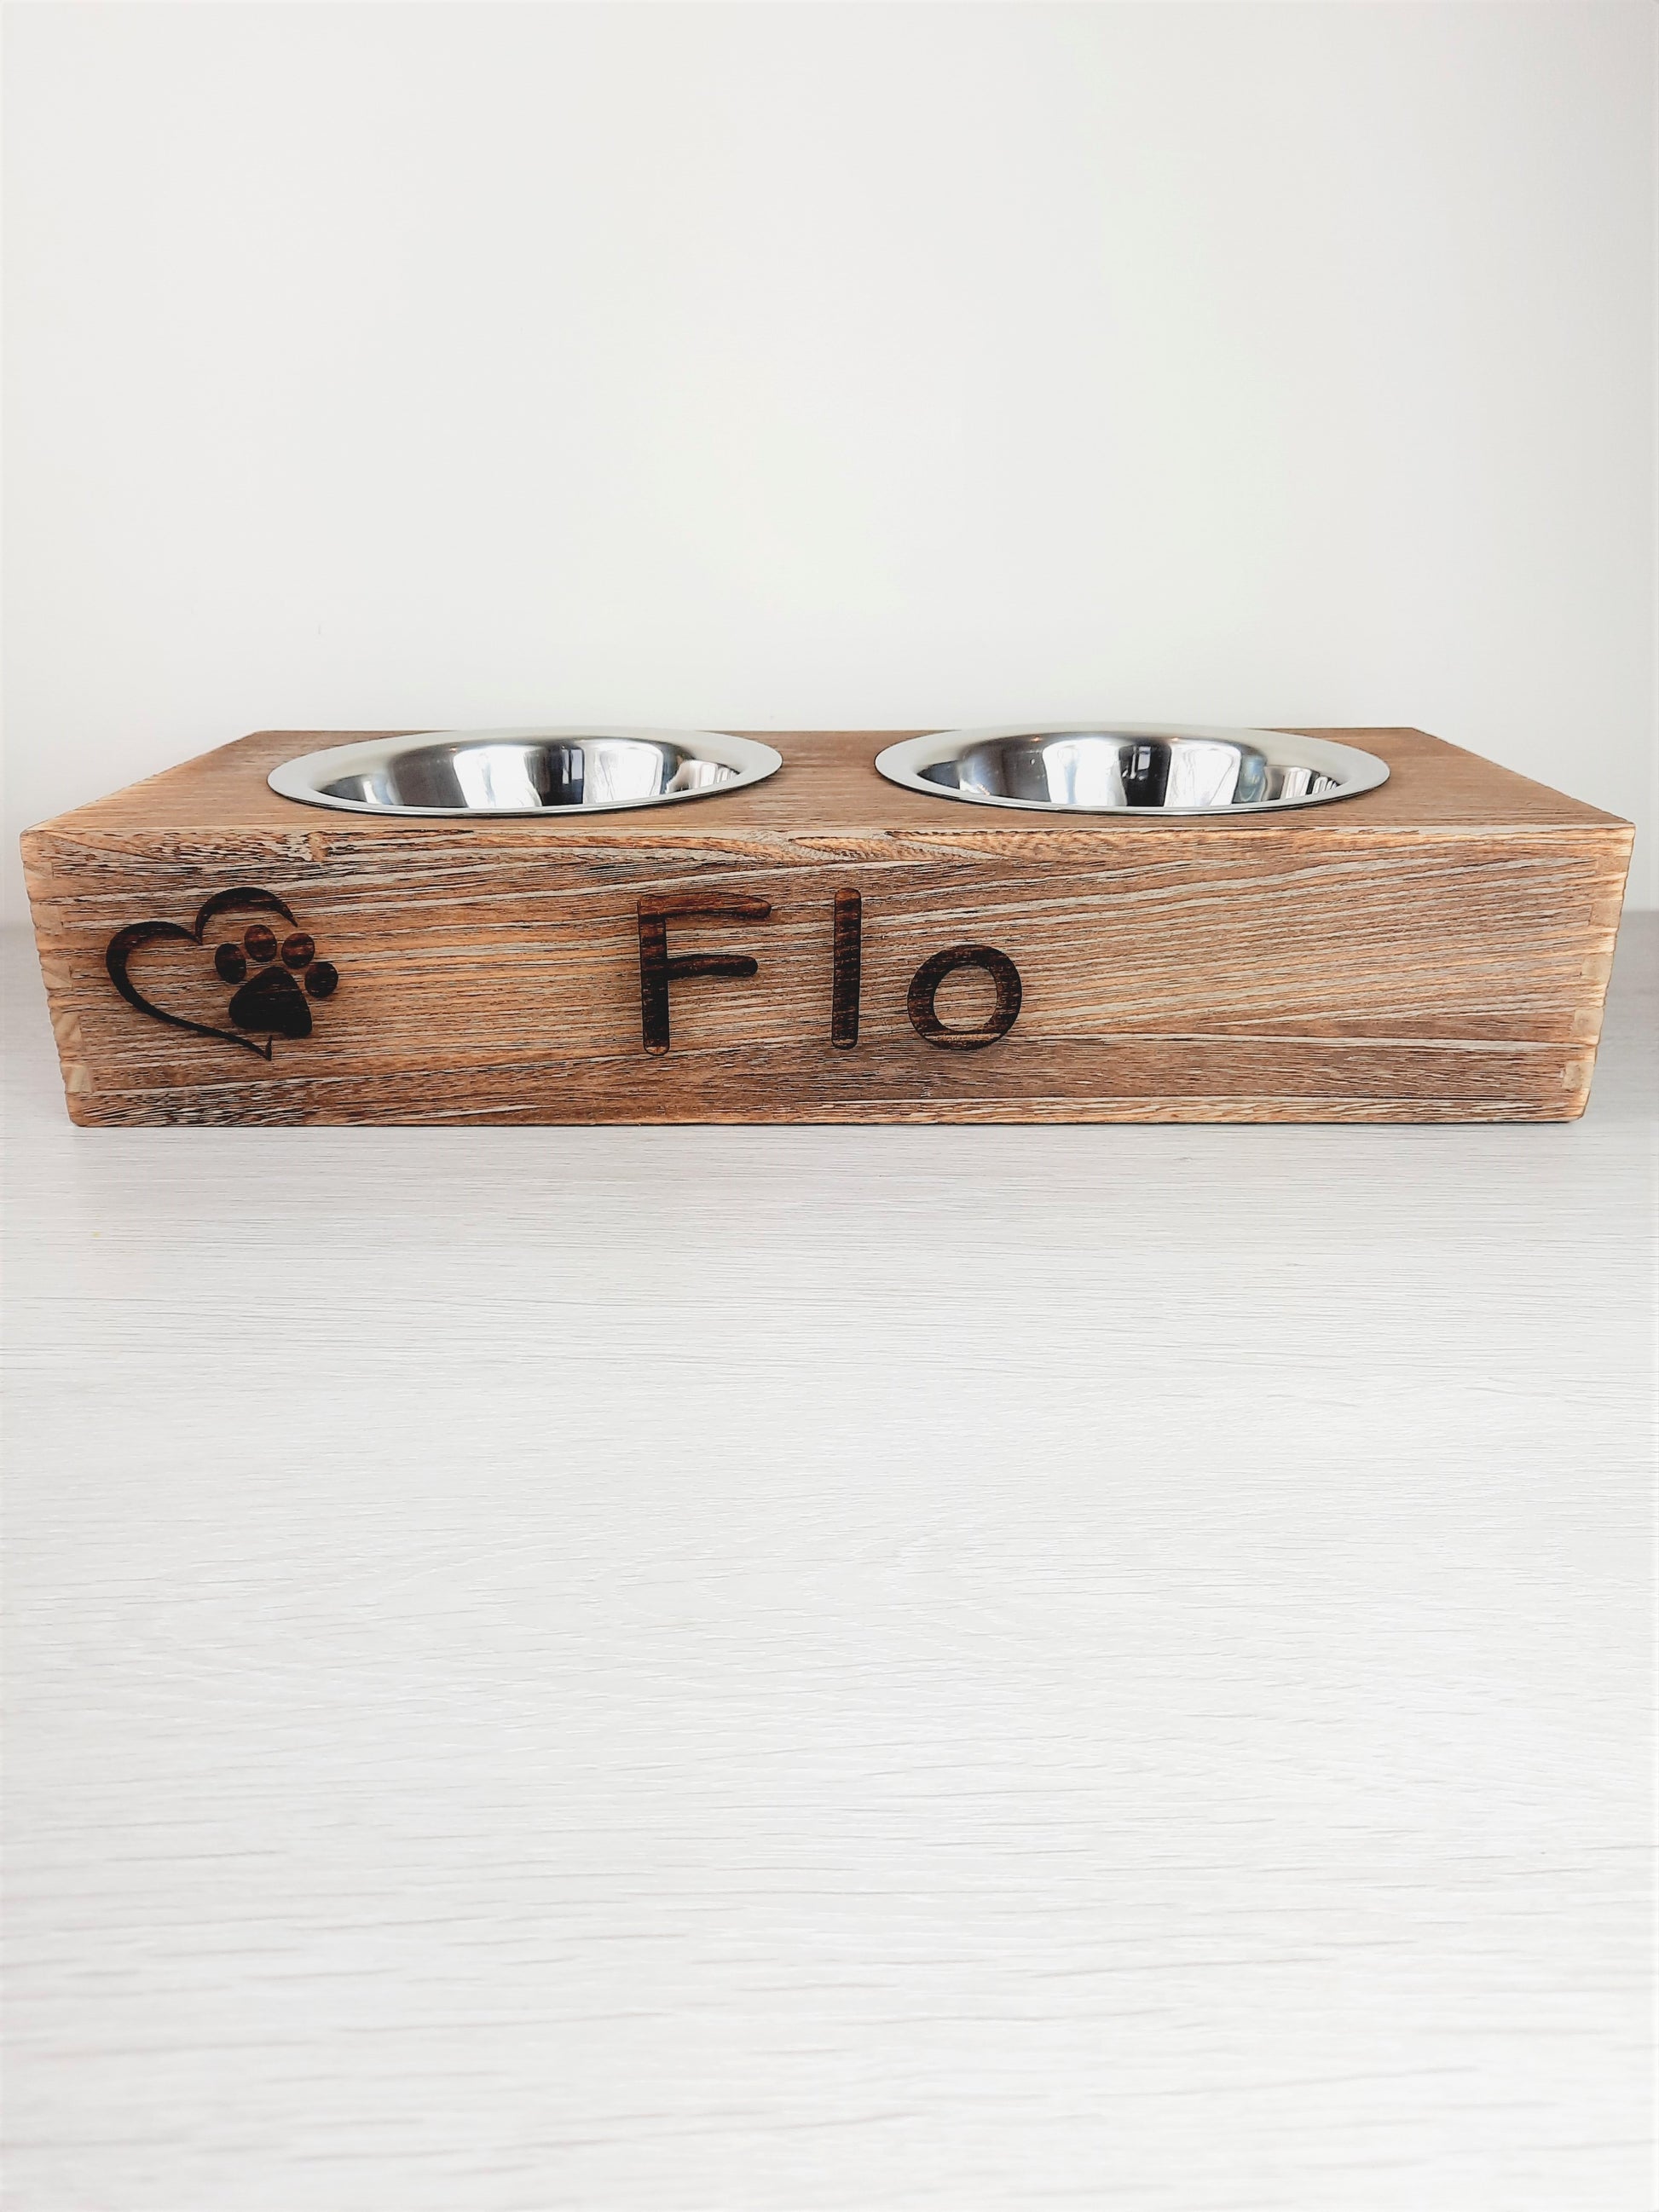 Personalised Pet Bowl Feeder Bamboo Wood with engraved paw with heart icon and pet's name "Flo"